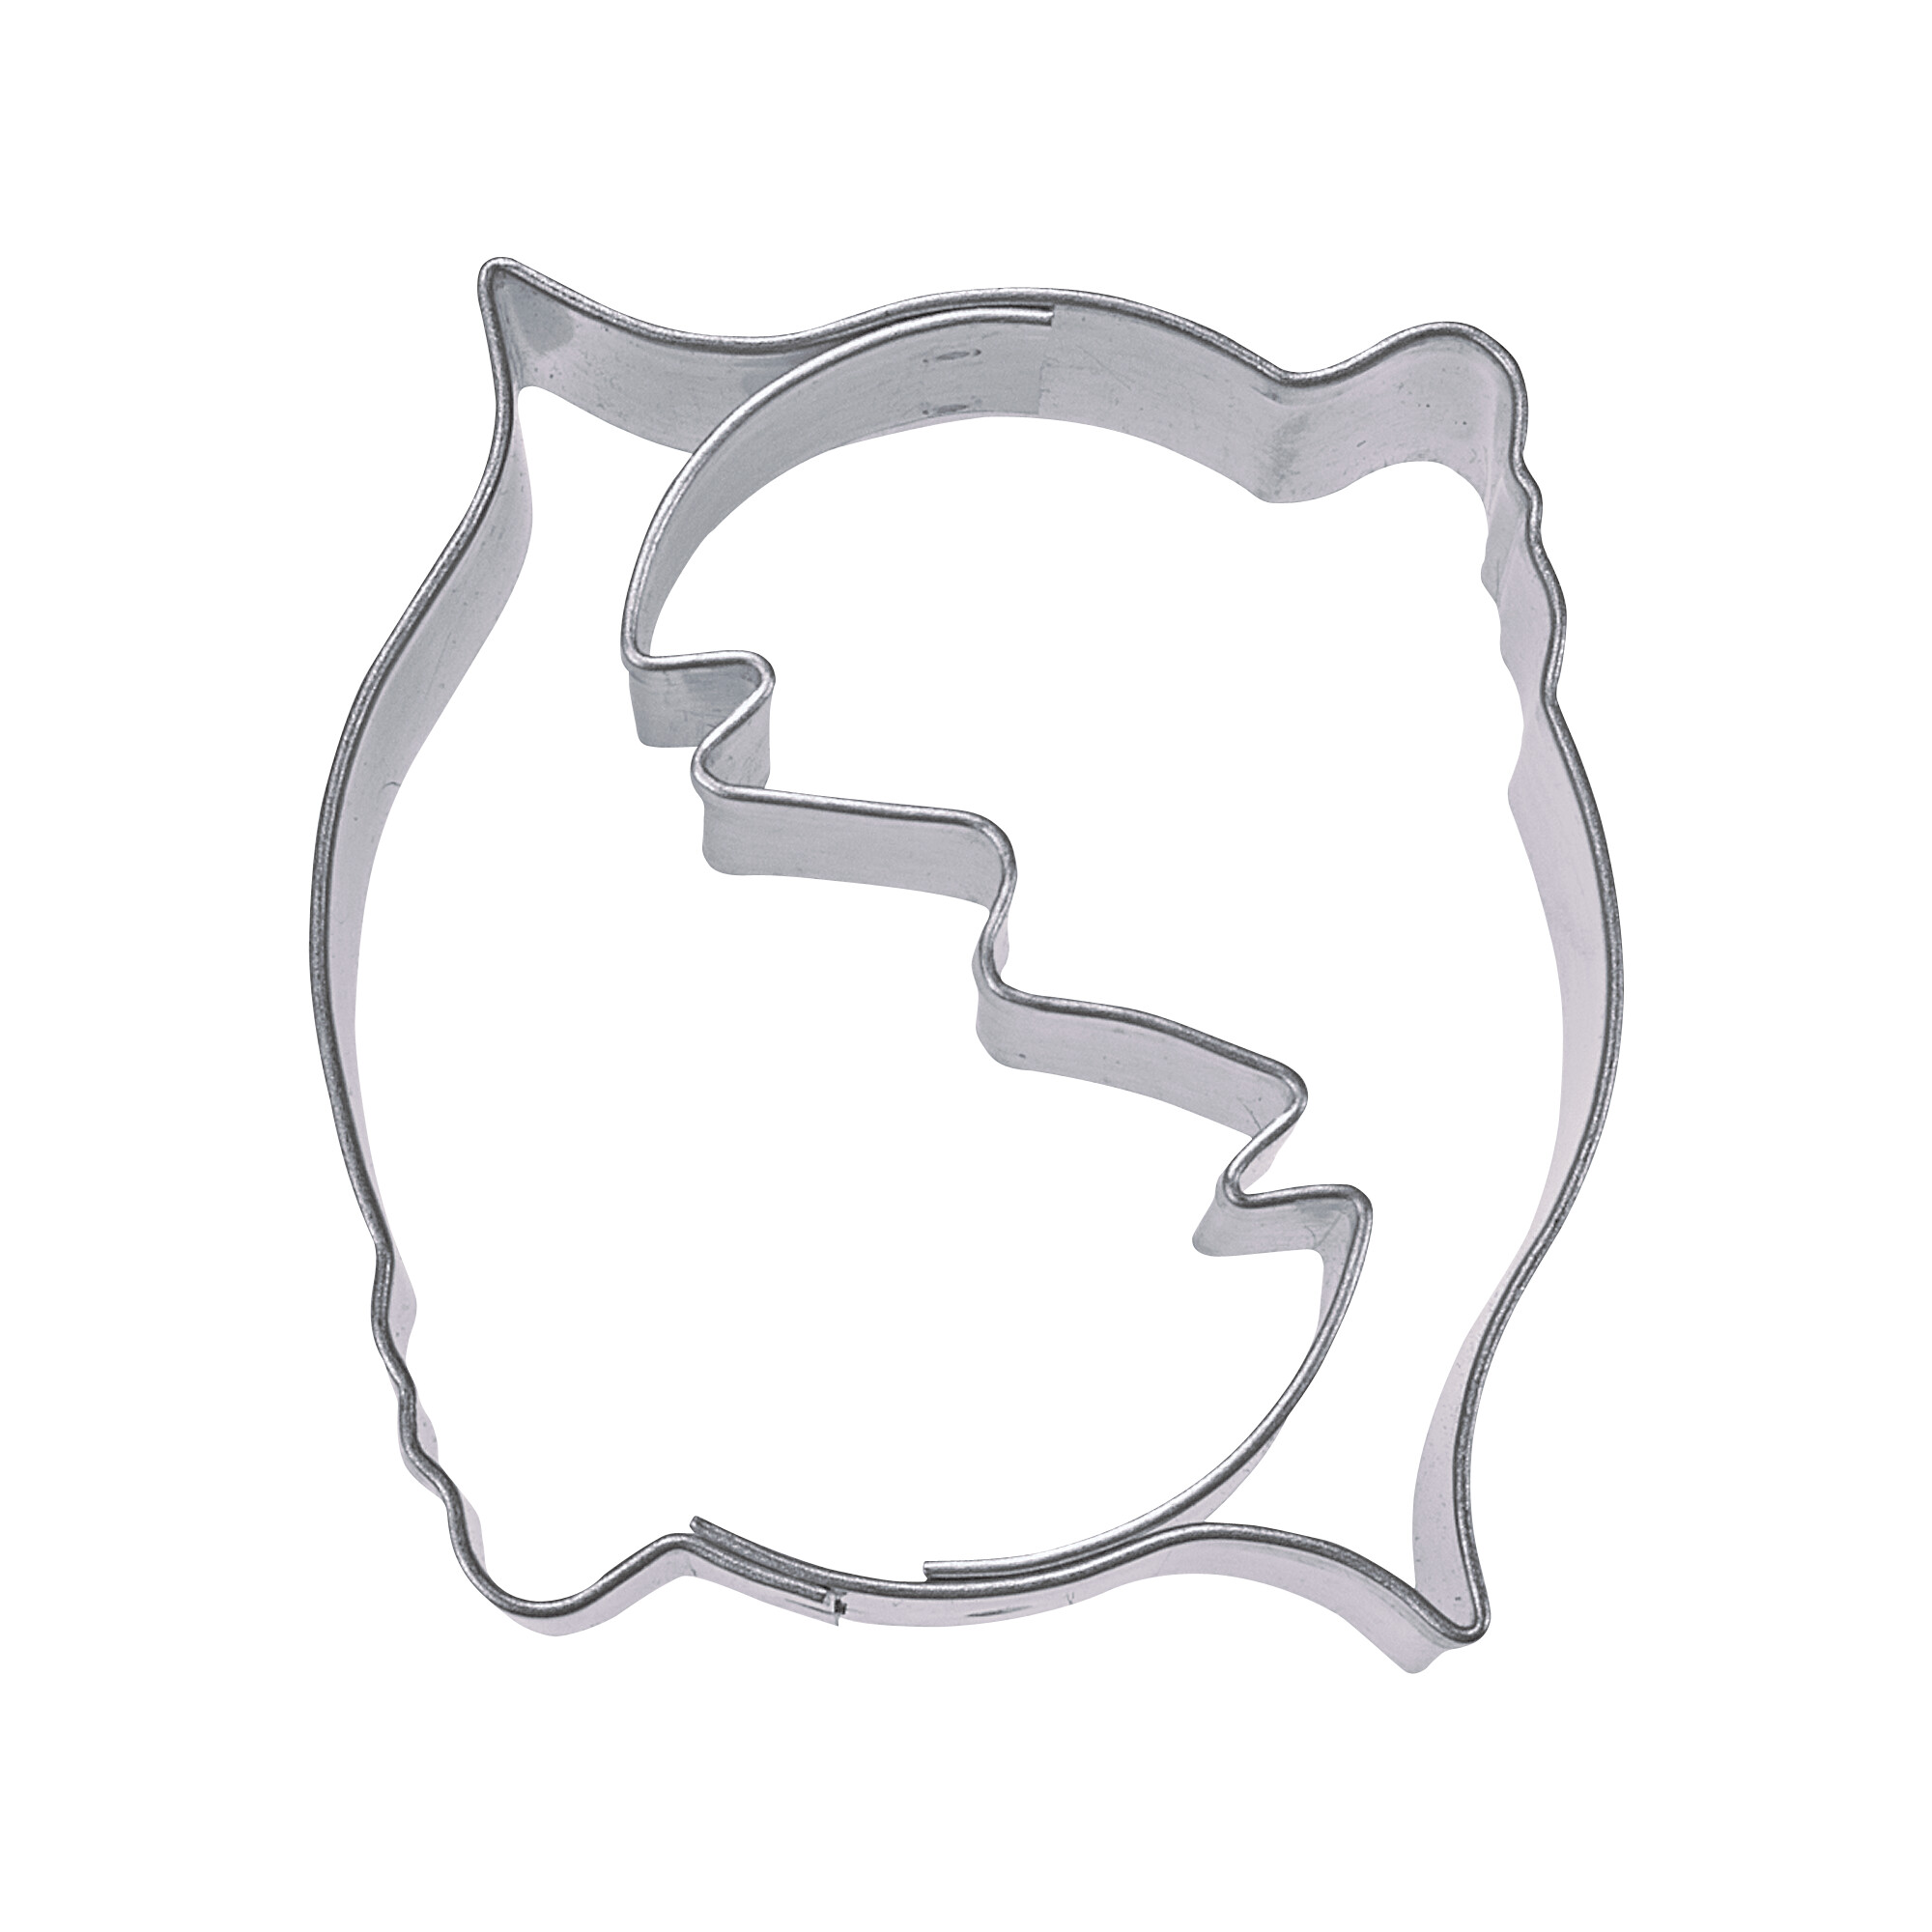 Cookie cutter with stamp – Sign of the zodiac fish